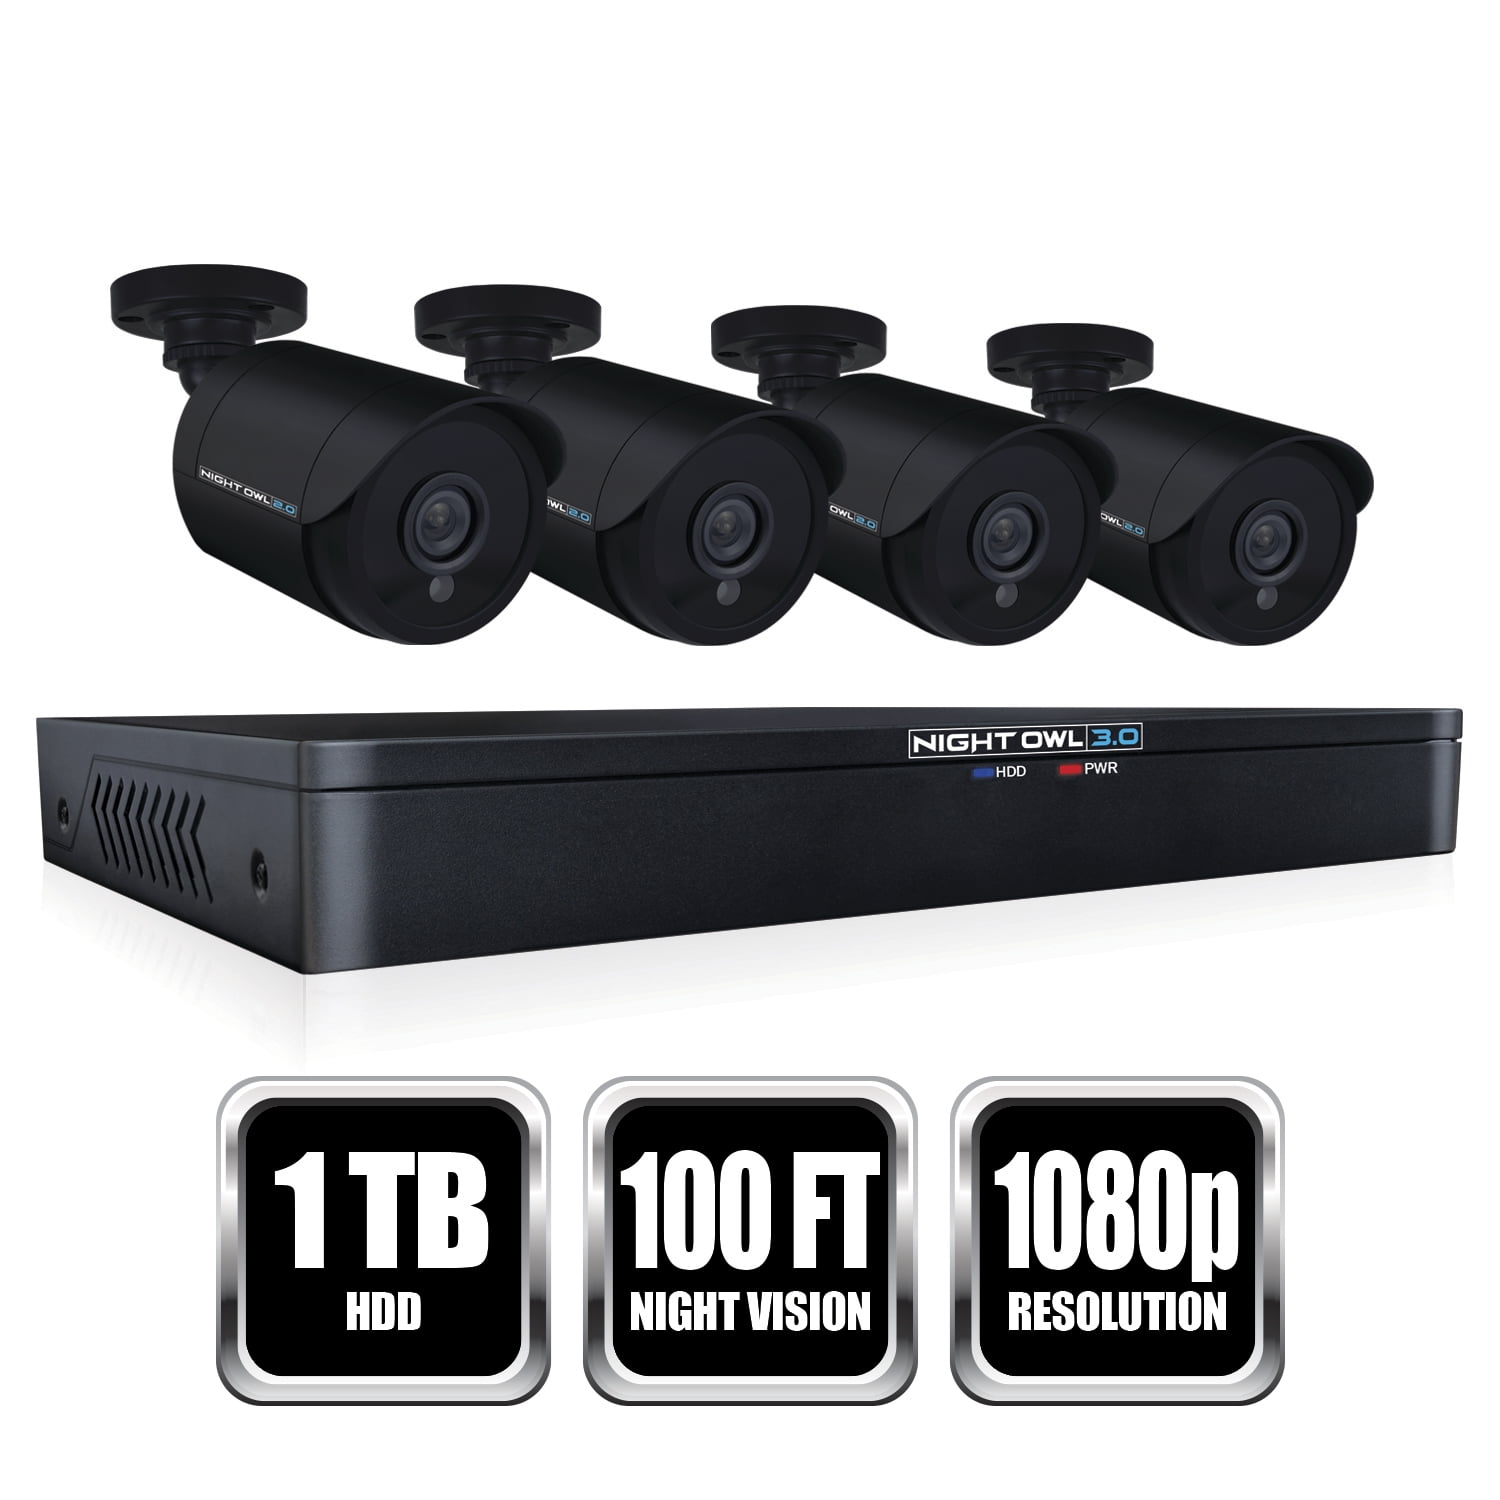 Night Owl 8 Channel HD Video Security 